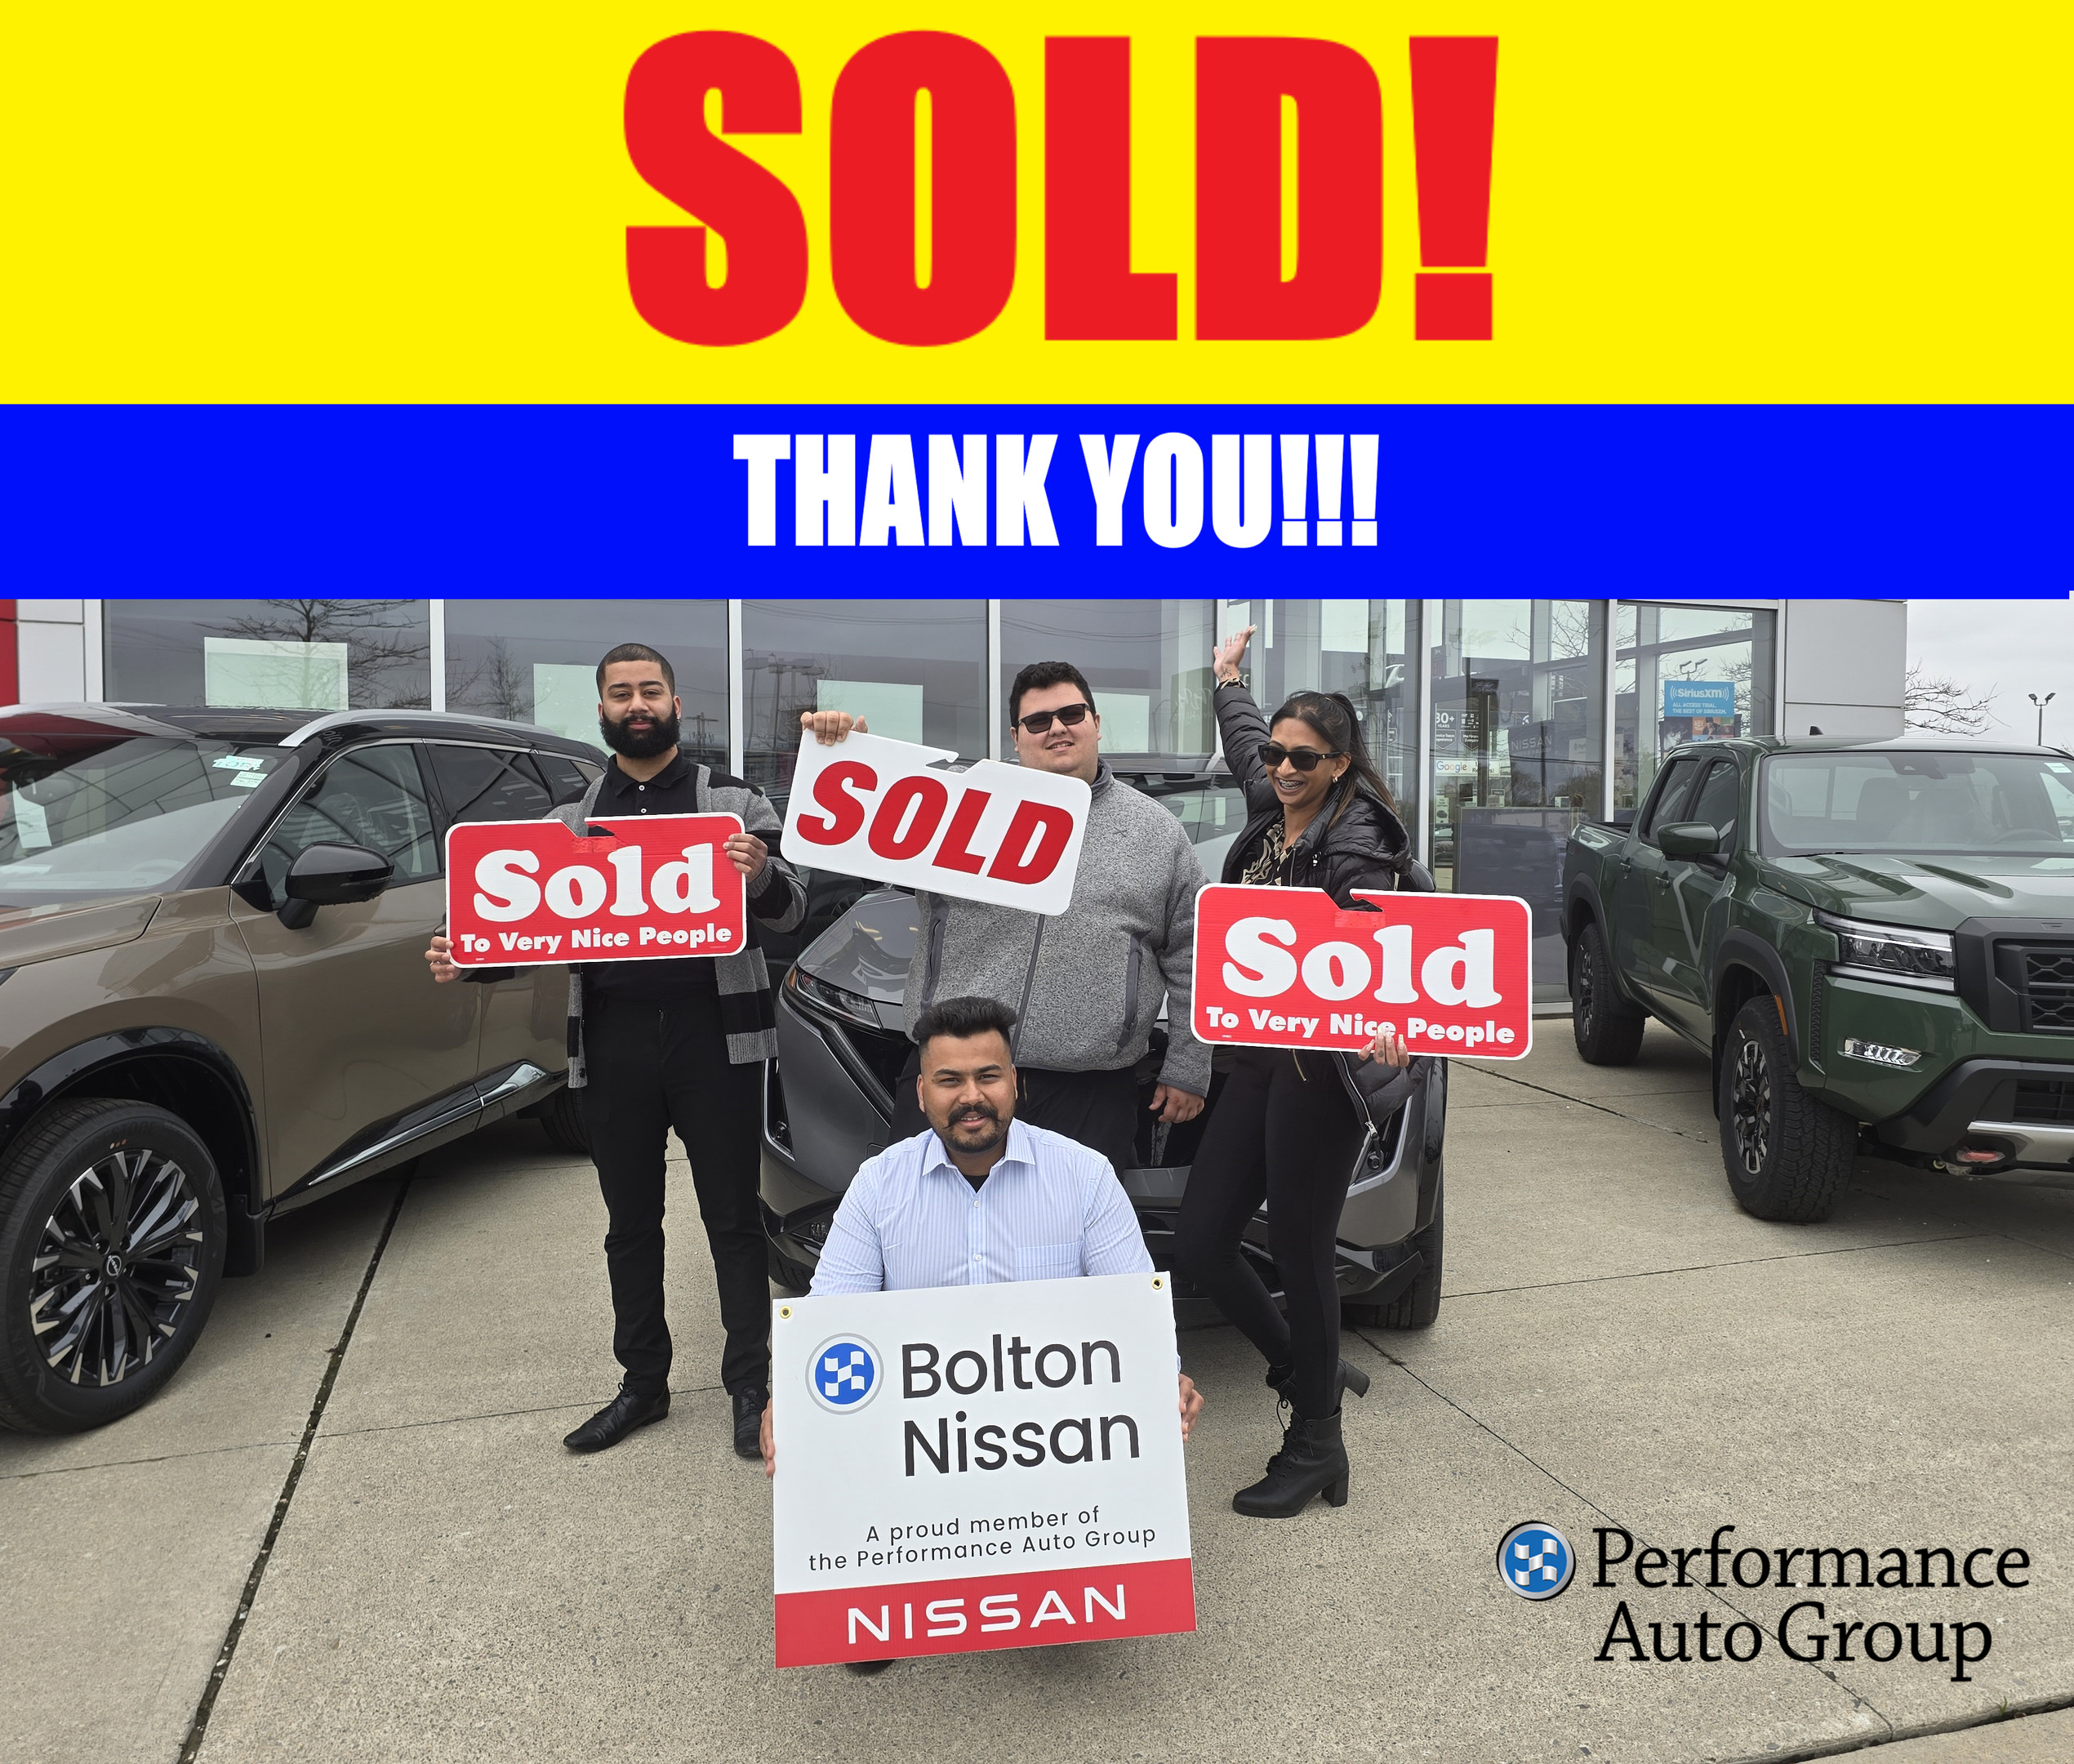 2016 Nissan Altima SV 2.5*SOLD - THANK YOU!*